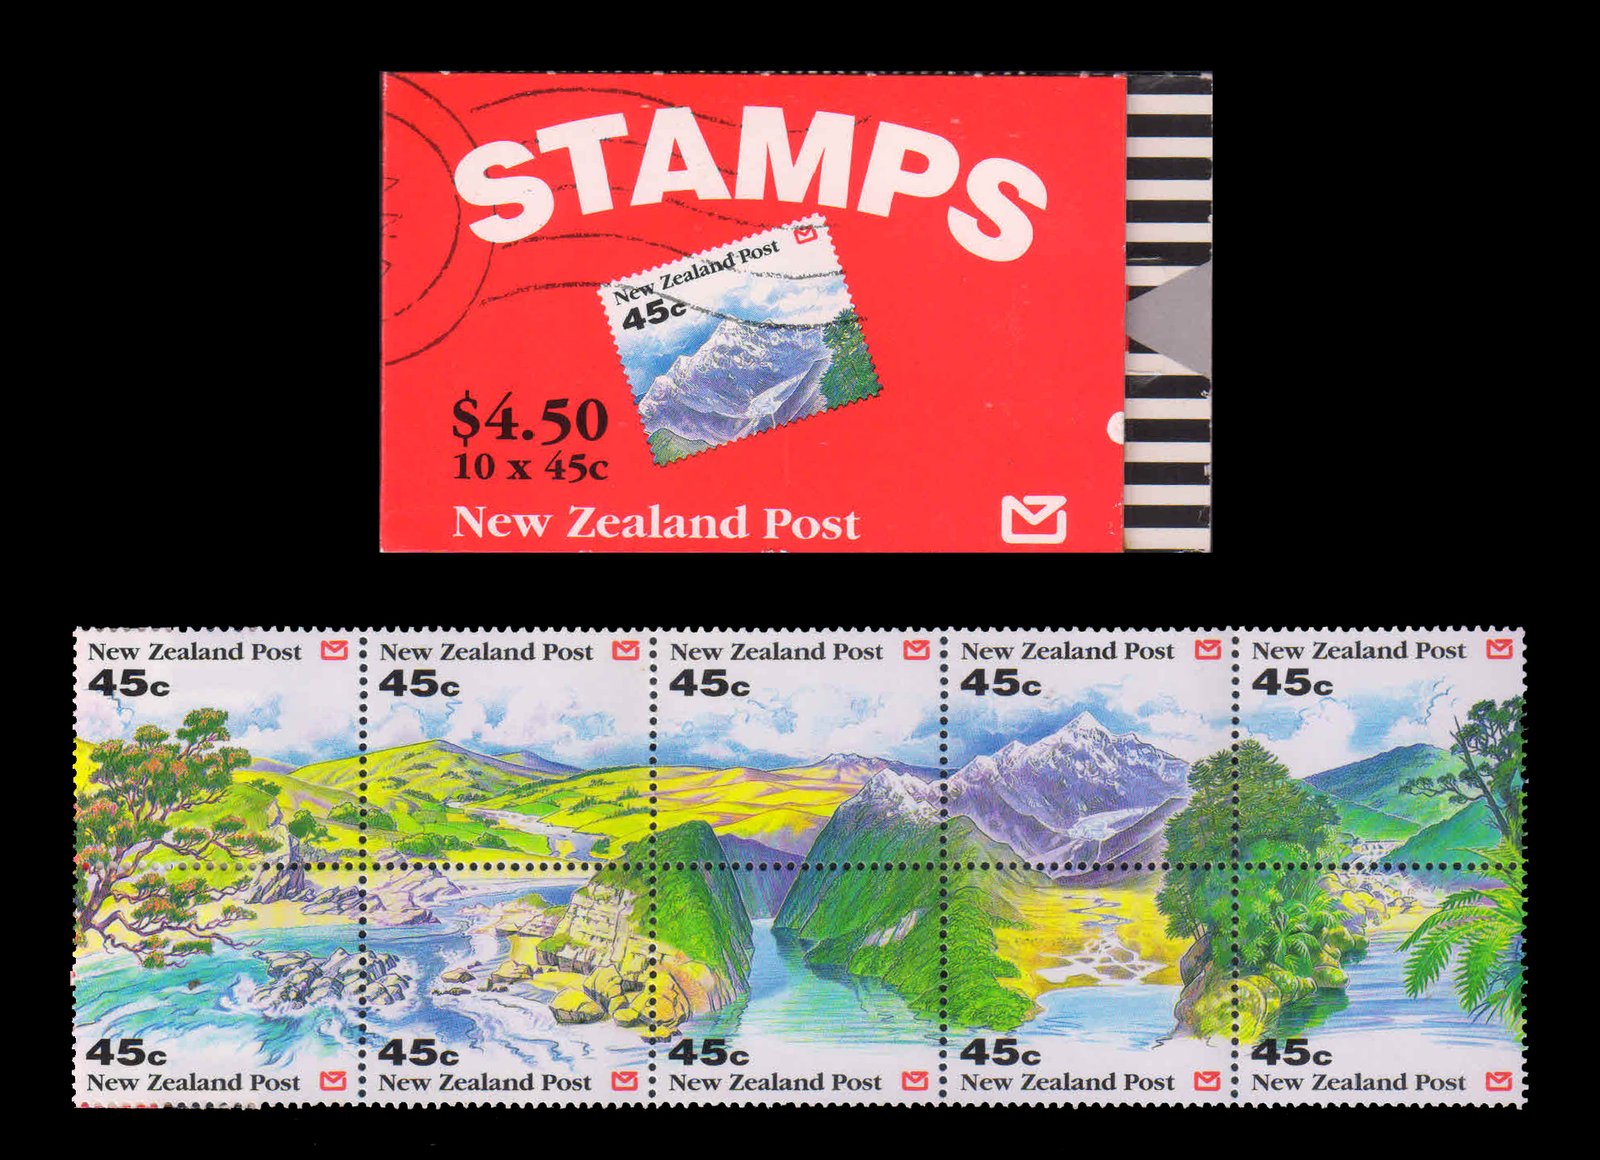 NEW ZEALAND 1992 - Landscapes, Tree and Hills, Waterfall, Beach, River Delta, Set of 10 Stamp Booklet, MNH, S.G. 1690-1699